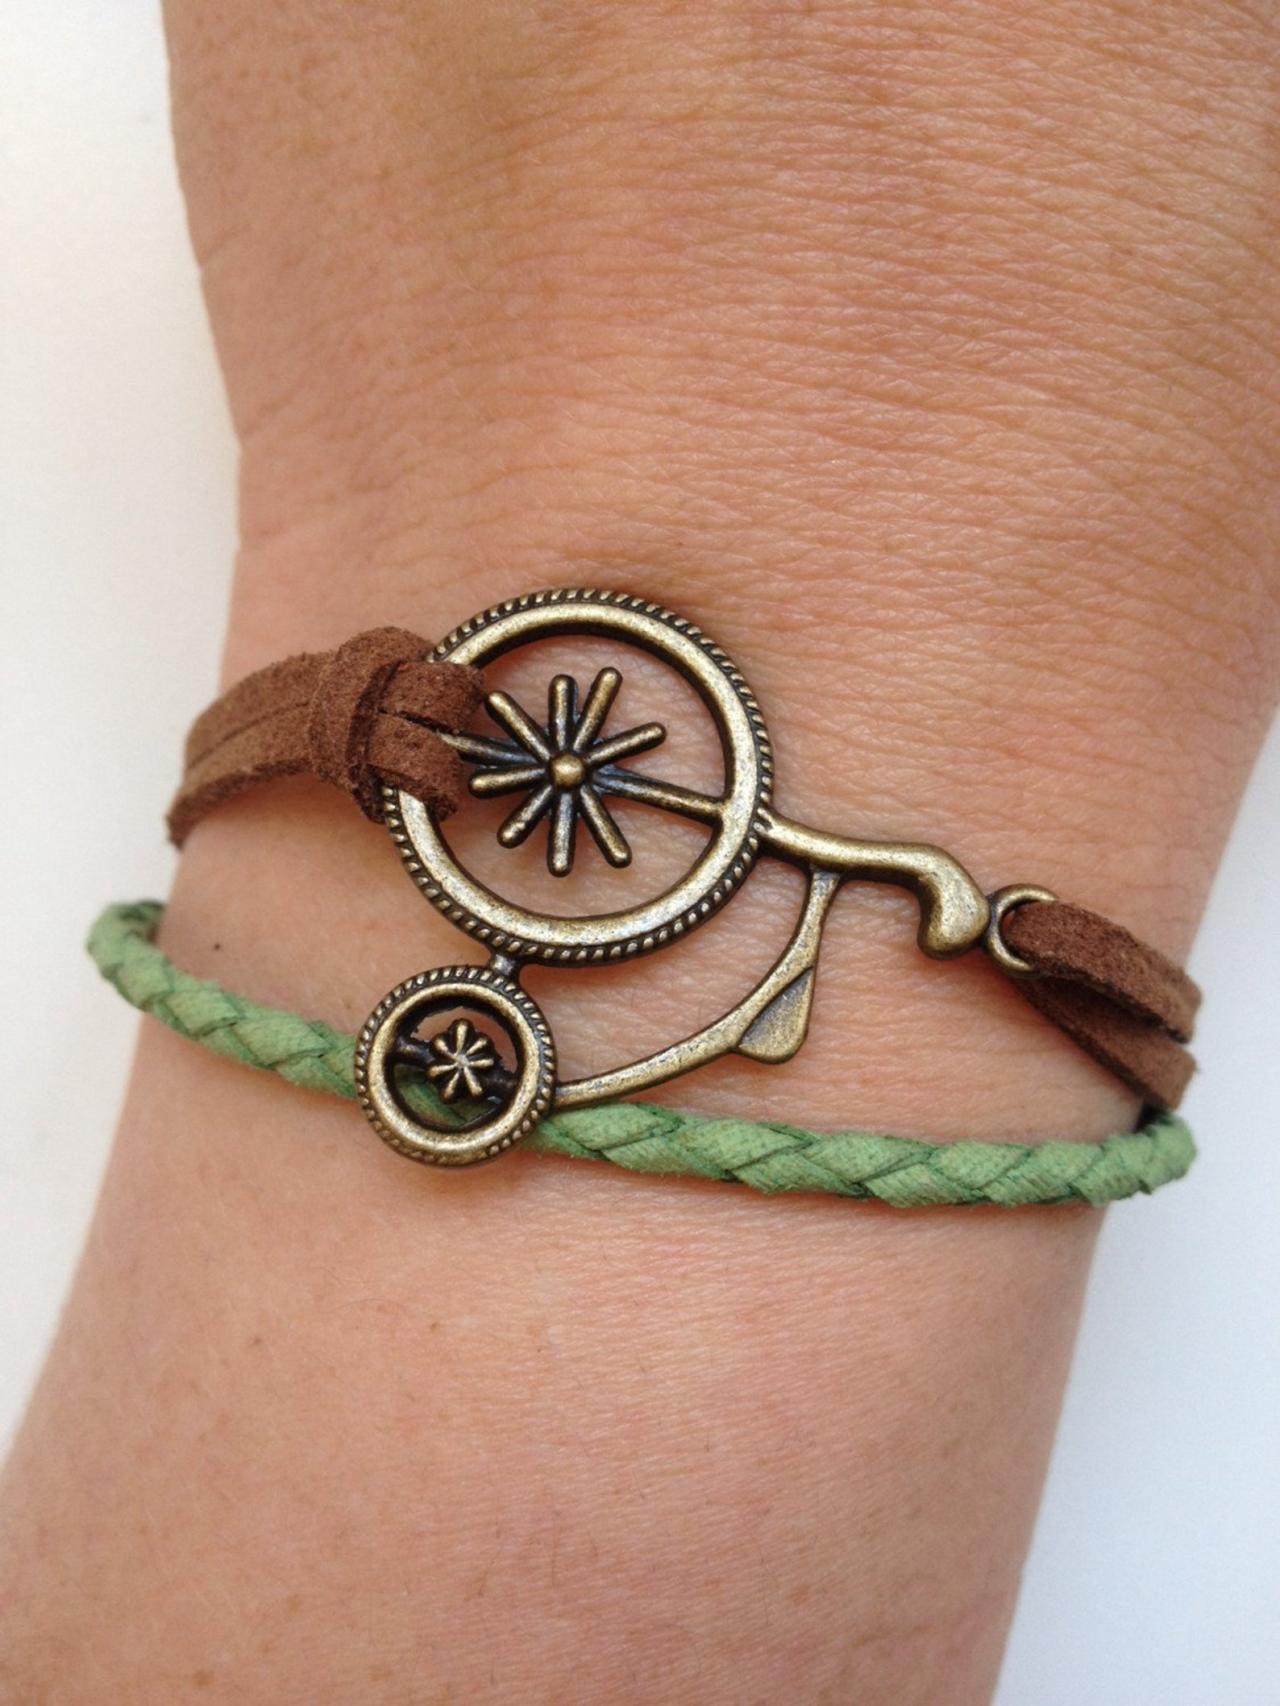 Leather Bracelet 137- Friendship Cuff Old Bicycle Bracelet Brown Green Leather Braid Gift Adjustable Trendy Womenswear Unique Innovative